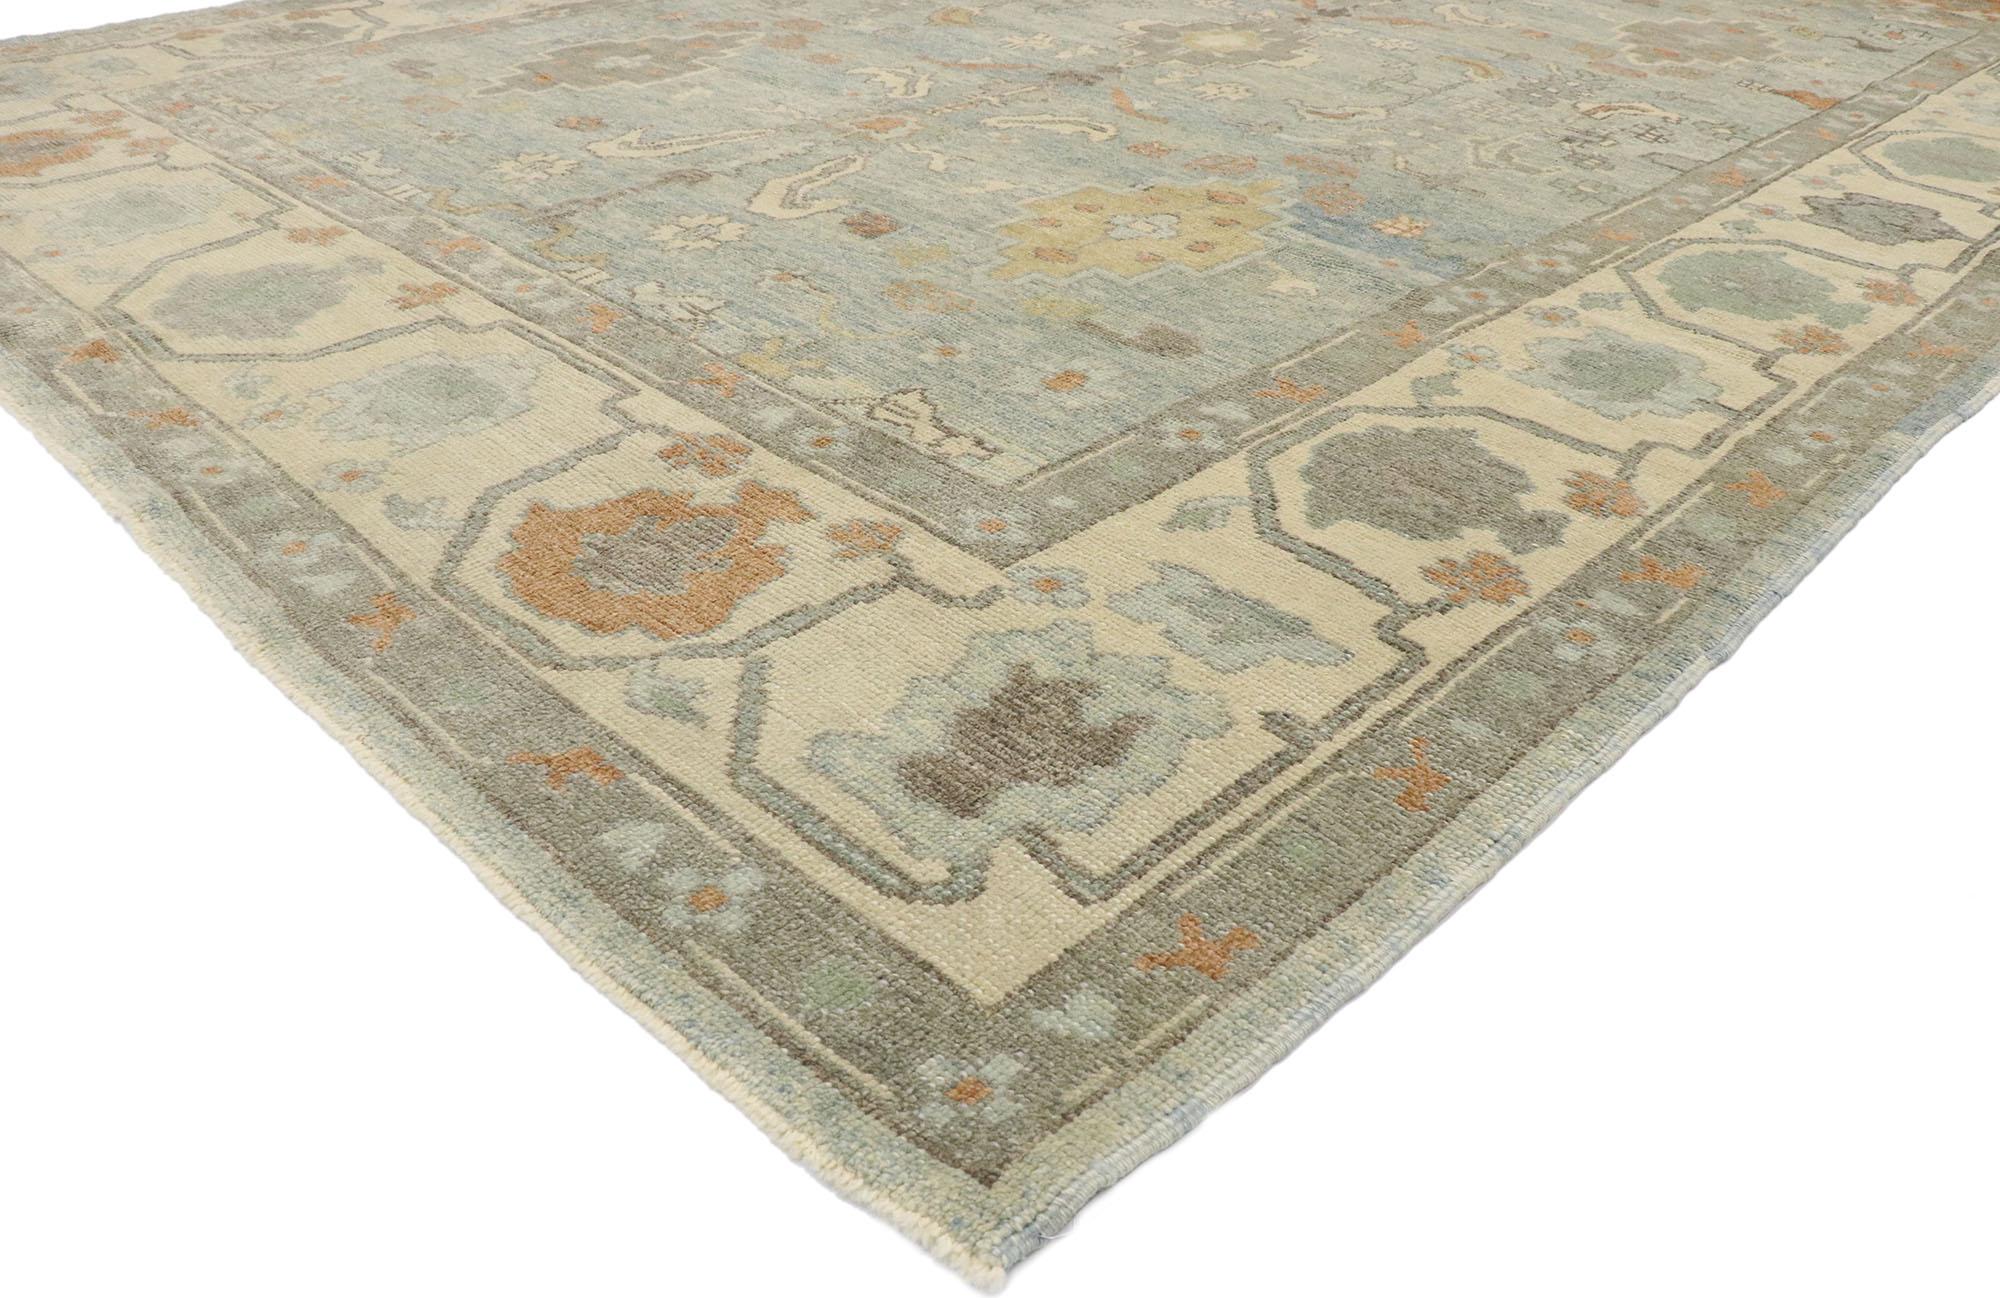 53402, new contemporary Turkish Oushak rug Modern New England Cape Cod style. Blending elements from the modern world with a historic New England color palette, this hand knotted wool contemporary Turkish Oushak rug is poised to impress. The